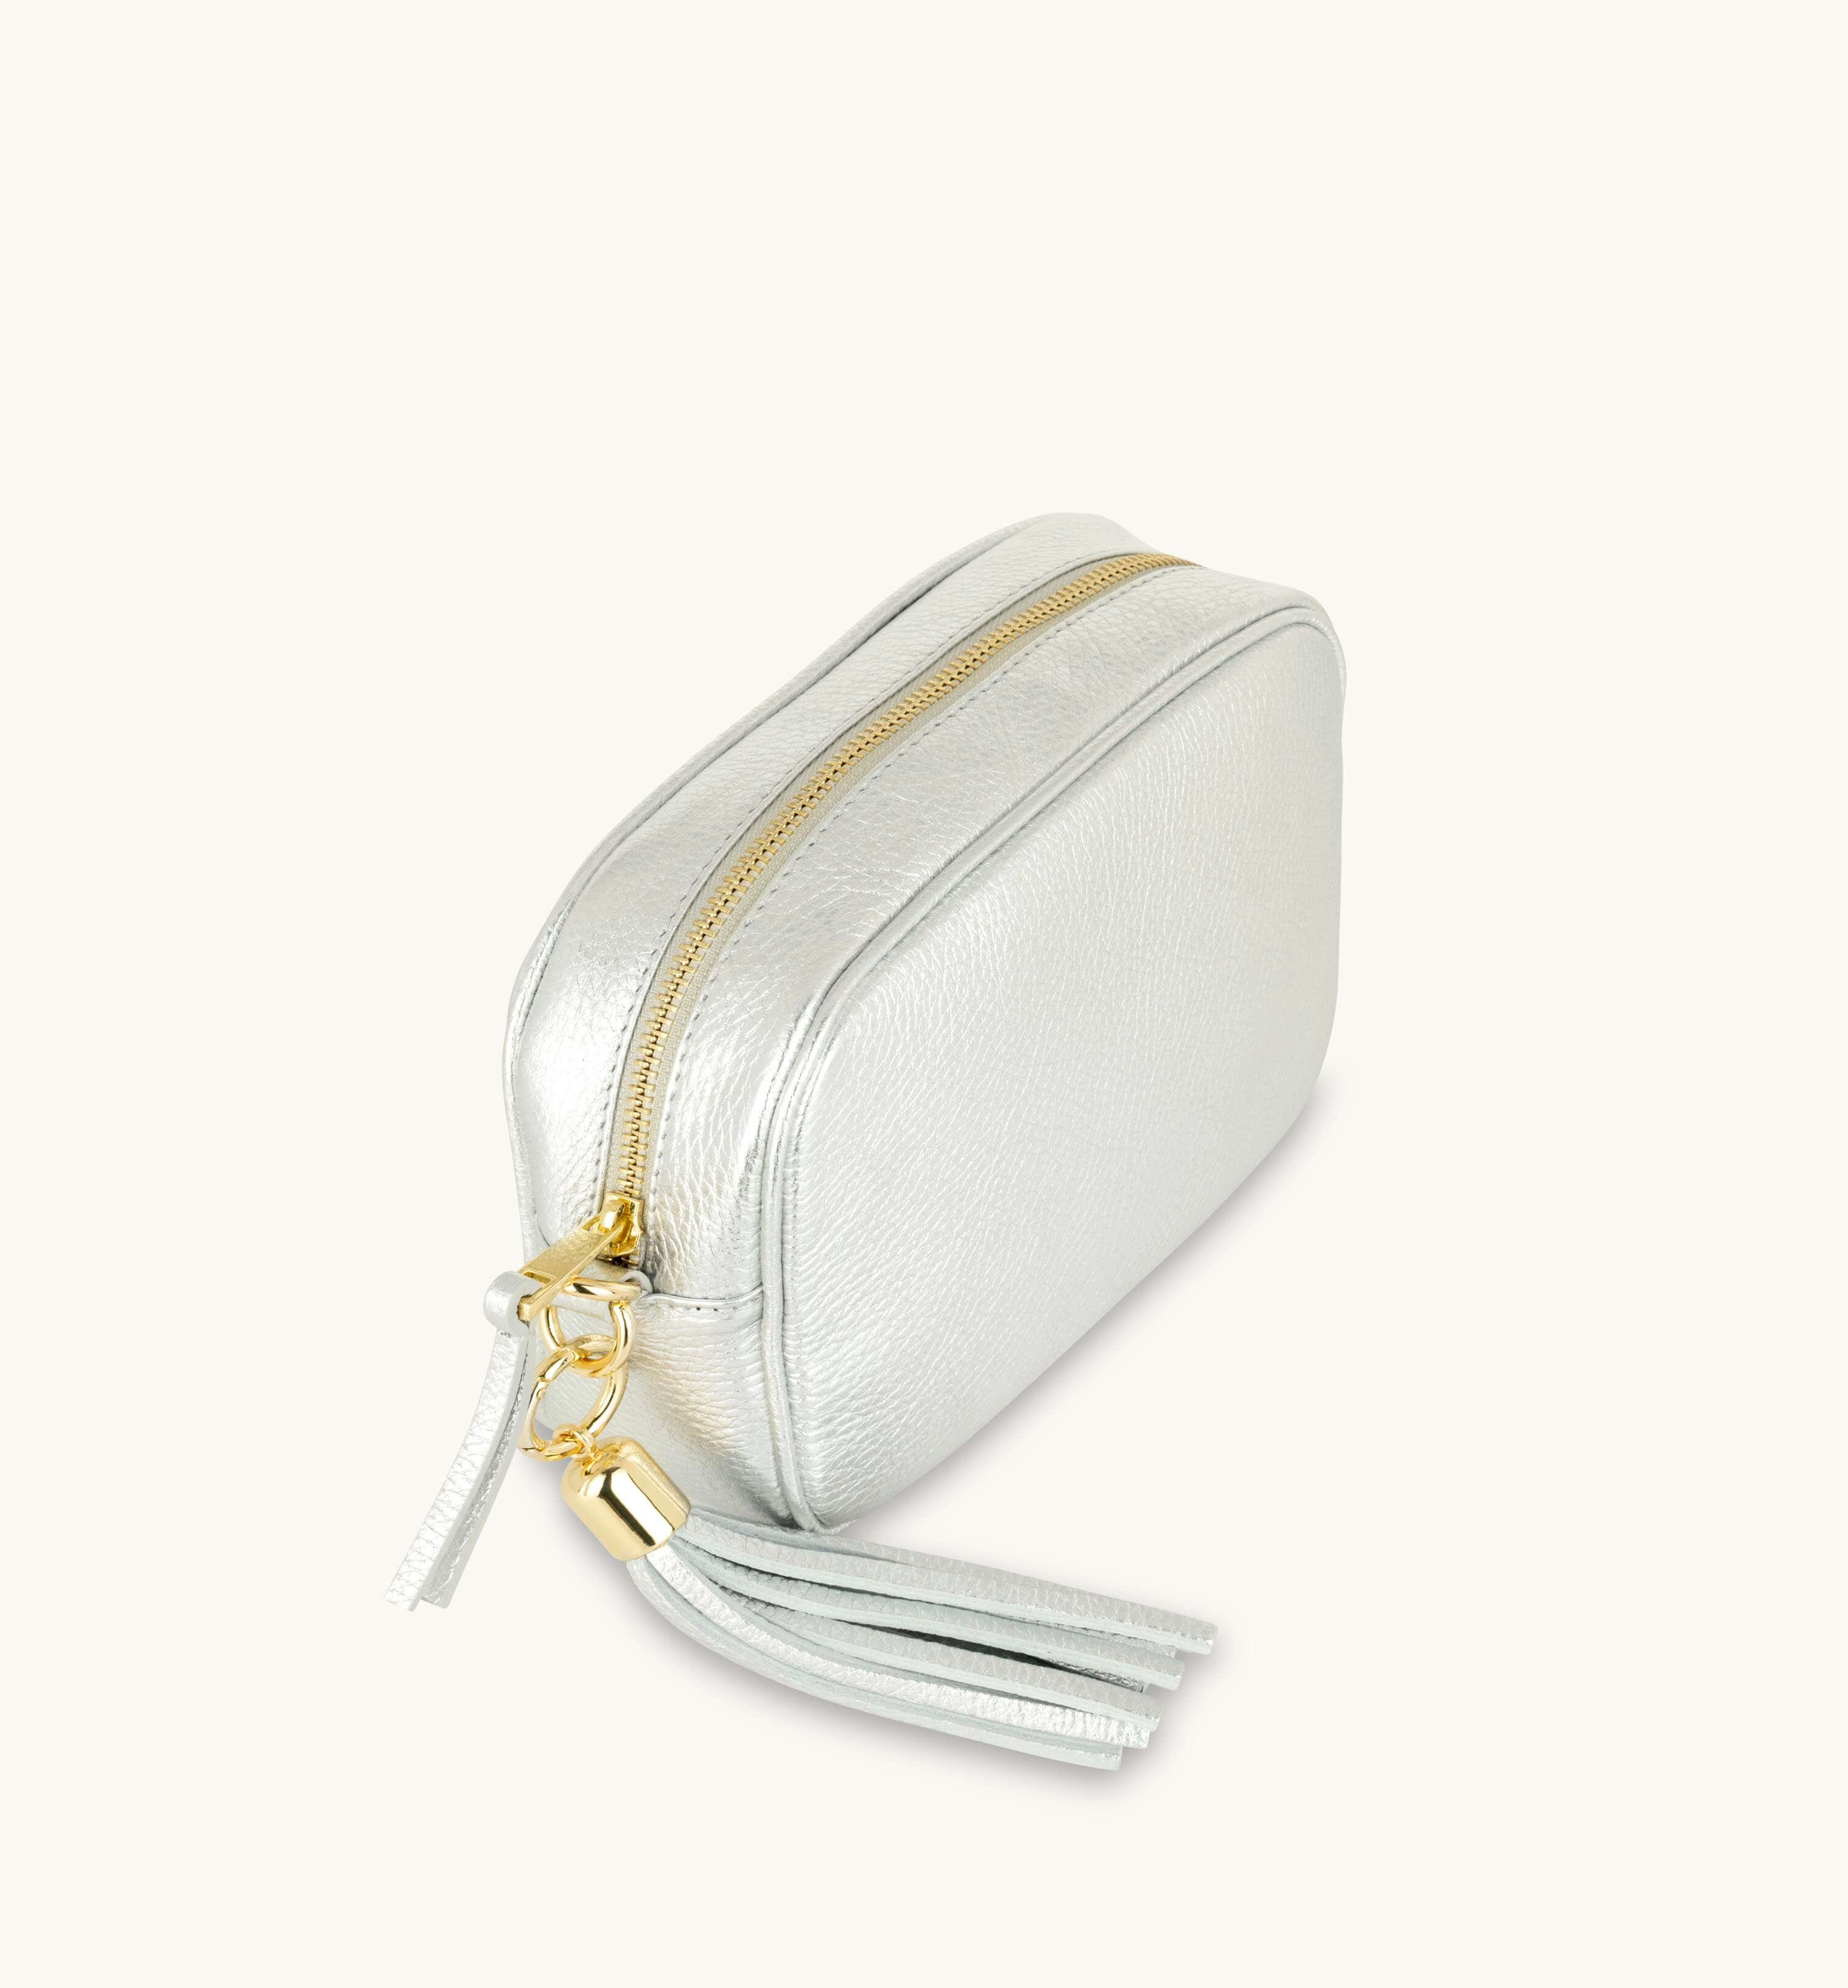 The Tassel Silver Leather Crossbody Bag With Gold Chain Strap